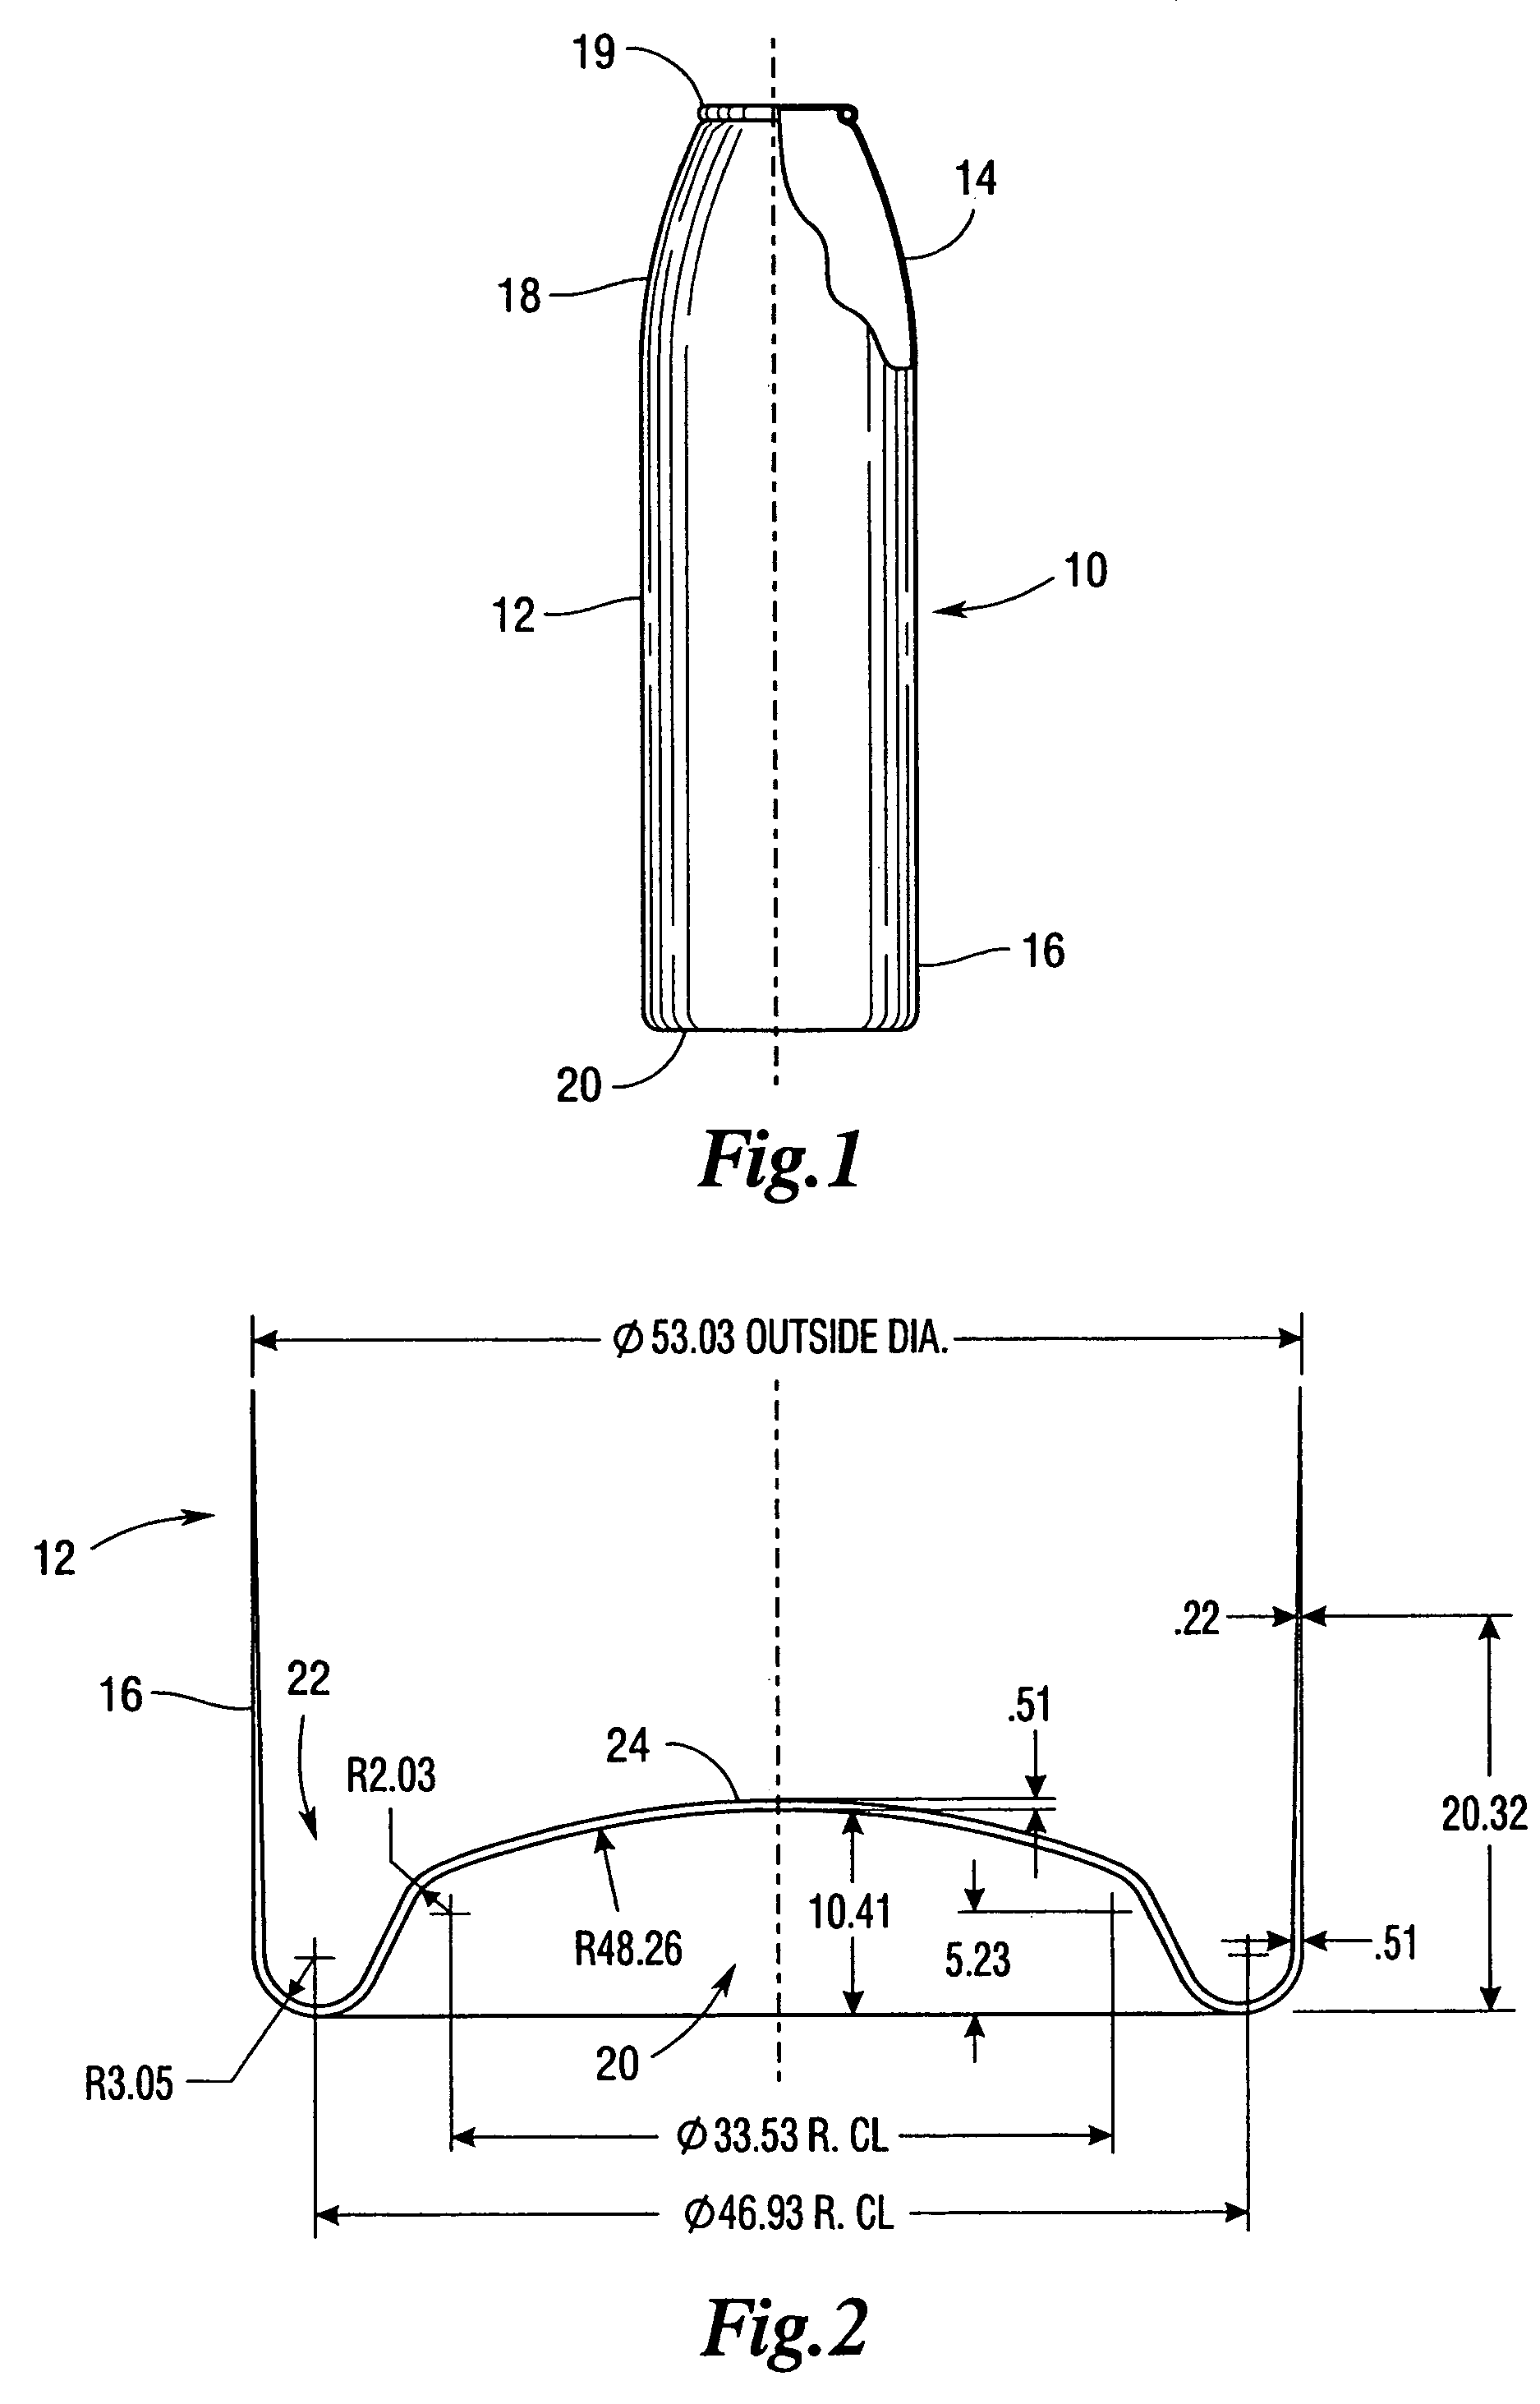 Method of producing aluminum container from coil feedstock